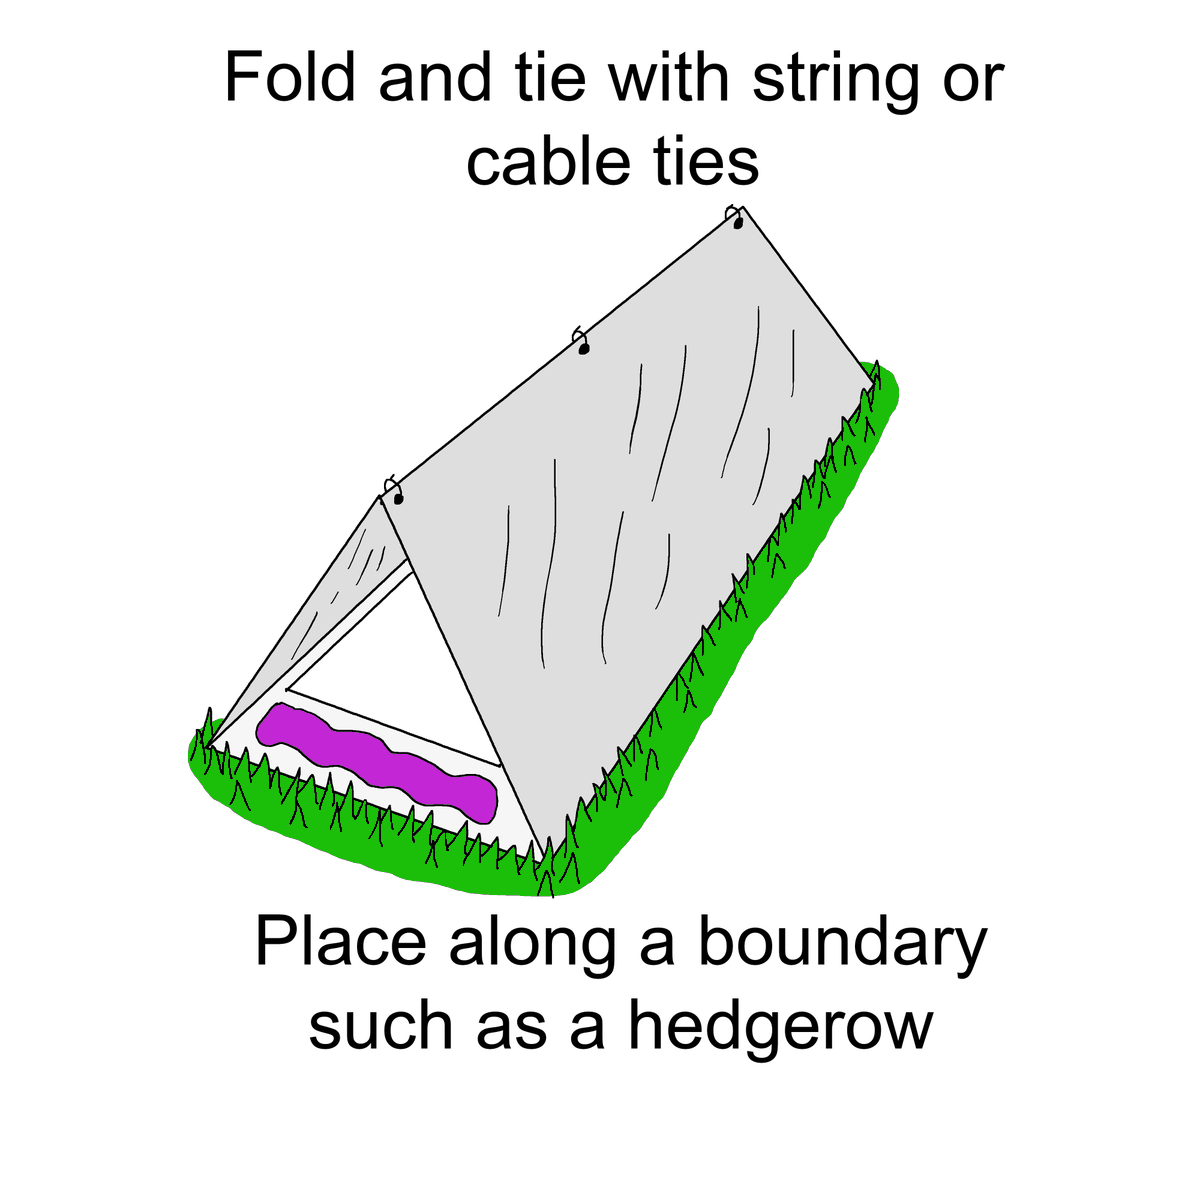 Step 4: Tie with cable ties or string and place along a boundary in your garden (a hedgerow or fence).